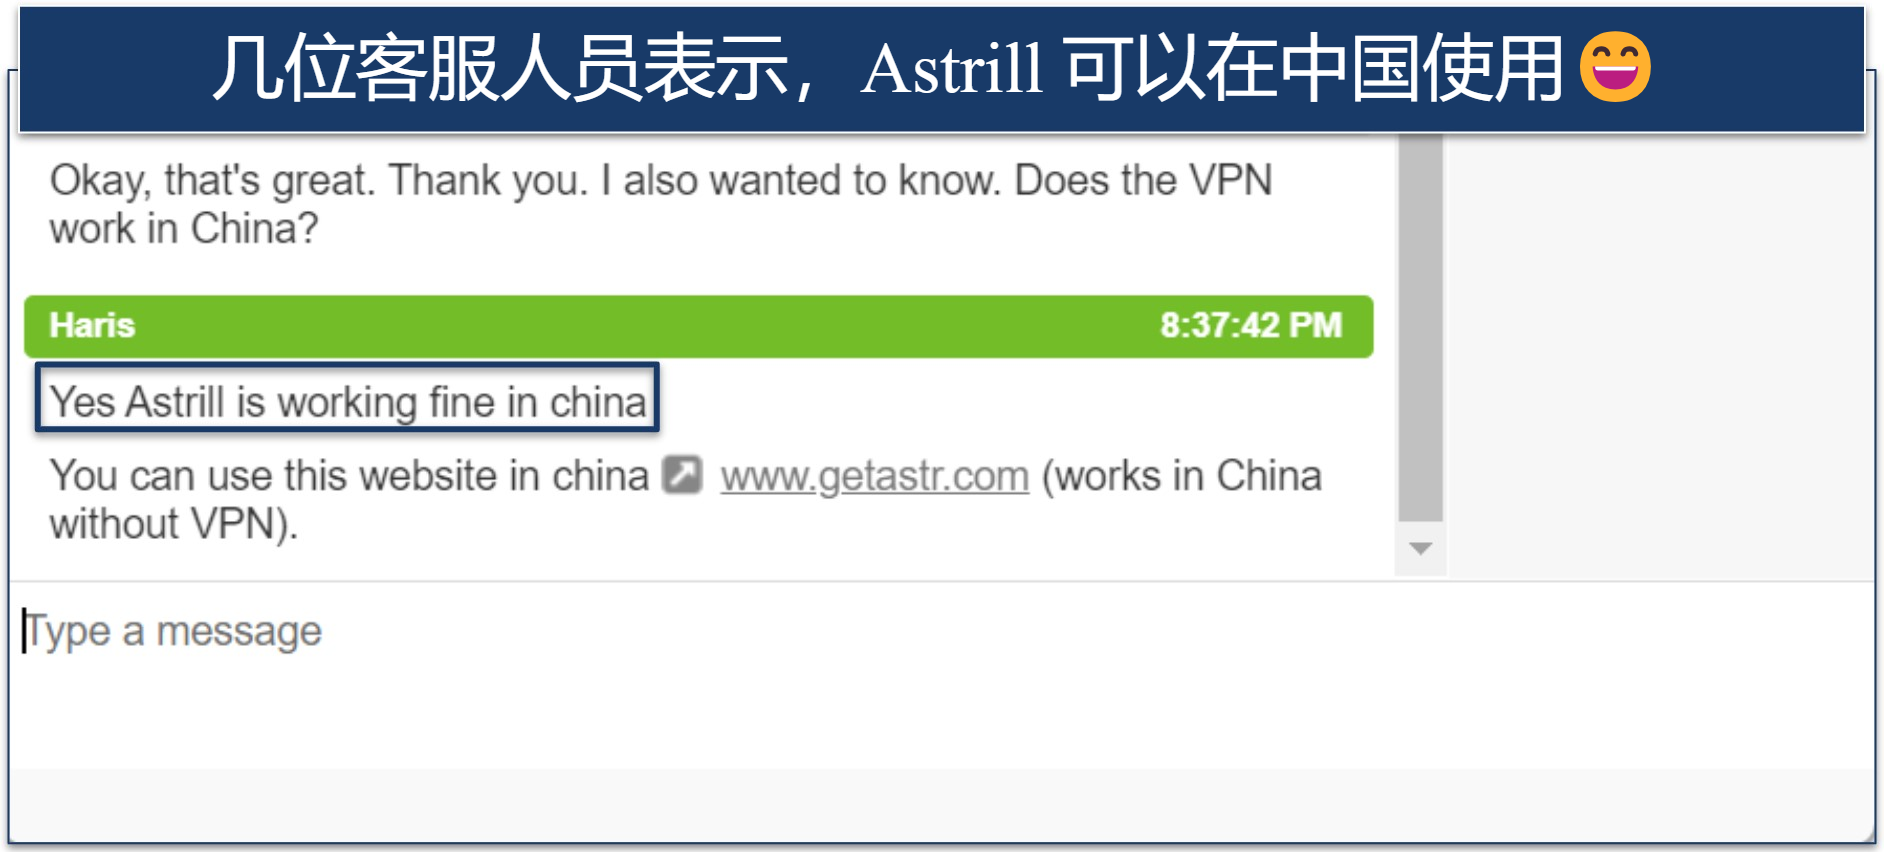 Screenshot of a conversation with Astrill VPN support where they state it works in China 